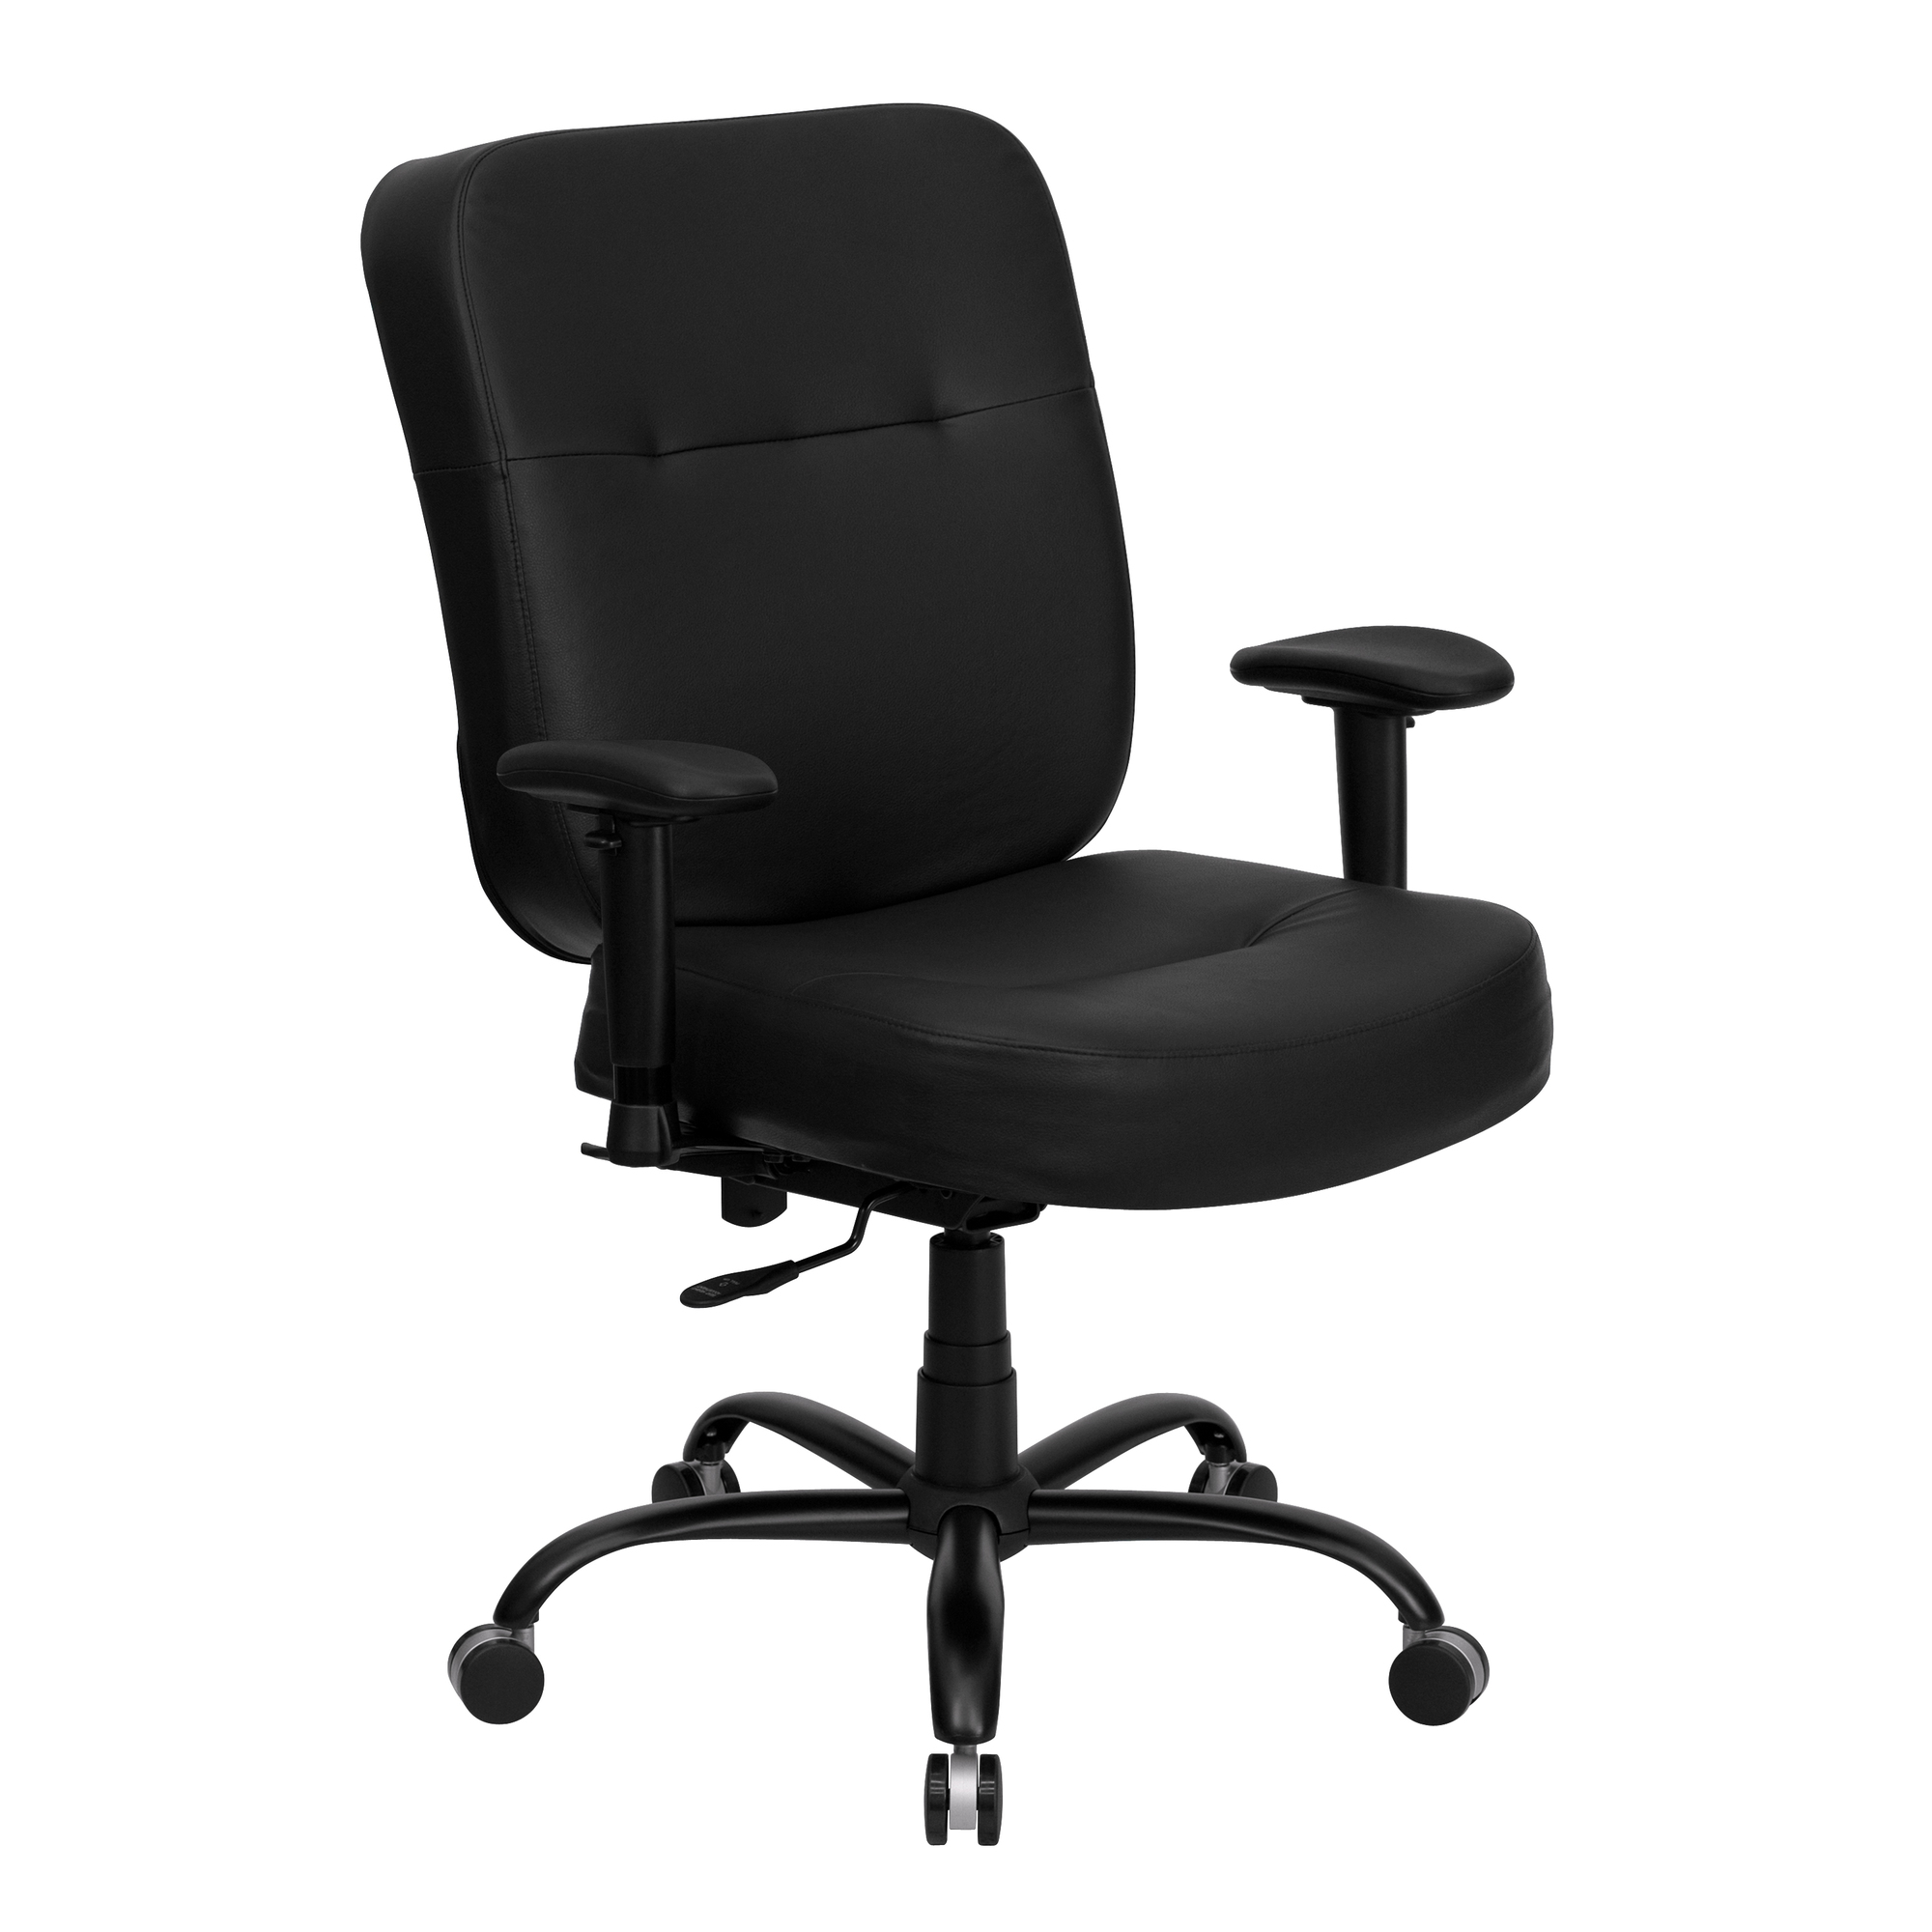 Flash Furniture, 400 lb. Rated High Back Black LeatherSoft Chair, Primary Color Black, Included (qty.) 1, Model WL735SYGBKLEAA